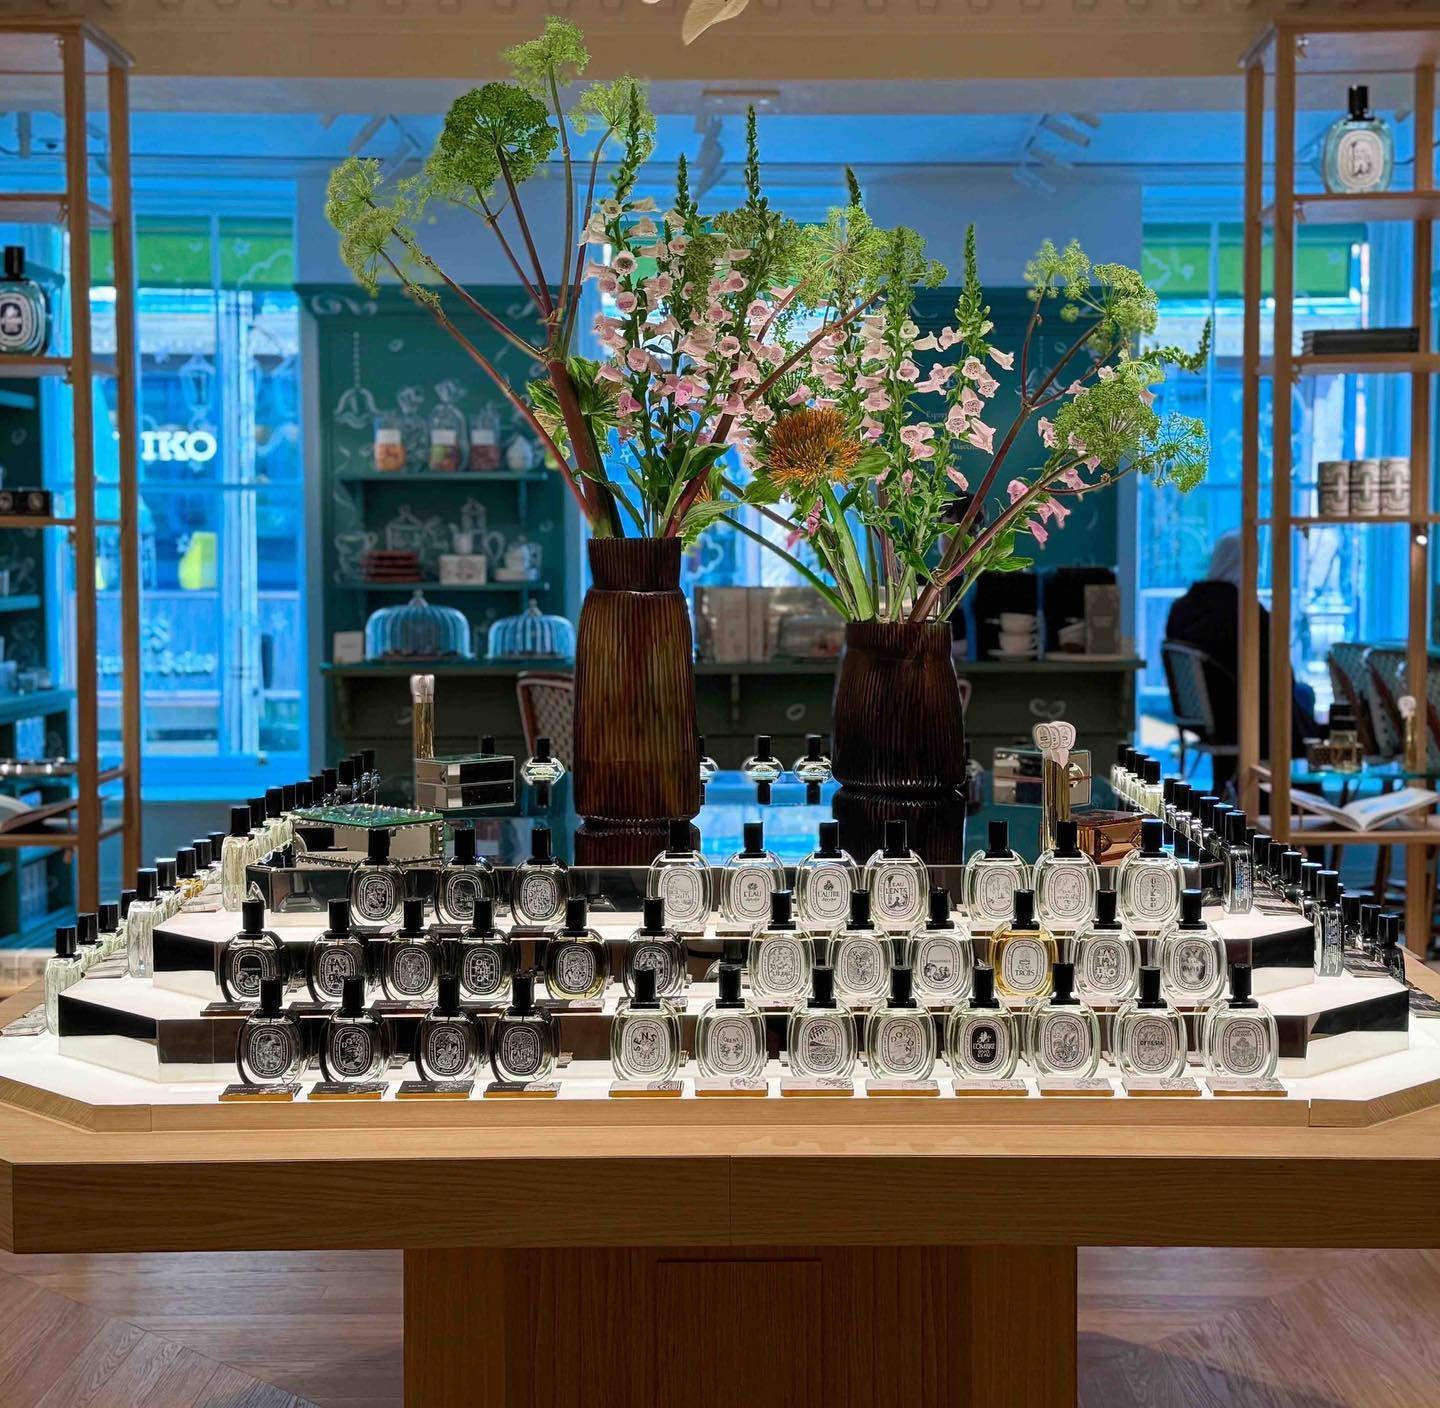 Jo&rsquo;s Scent Notes: La Maison @diptyque ✨

Have your senses dazzled by a new emporium on London&rsquo;s Bond Street 🤩

It isn&rsquo;t just a shop; it&rsquo;s really a bit of a Diptyque museum, too, with a long stretch of cabinetry showing artefa